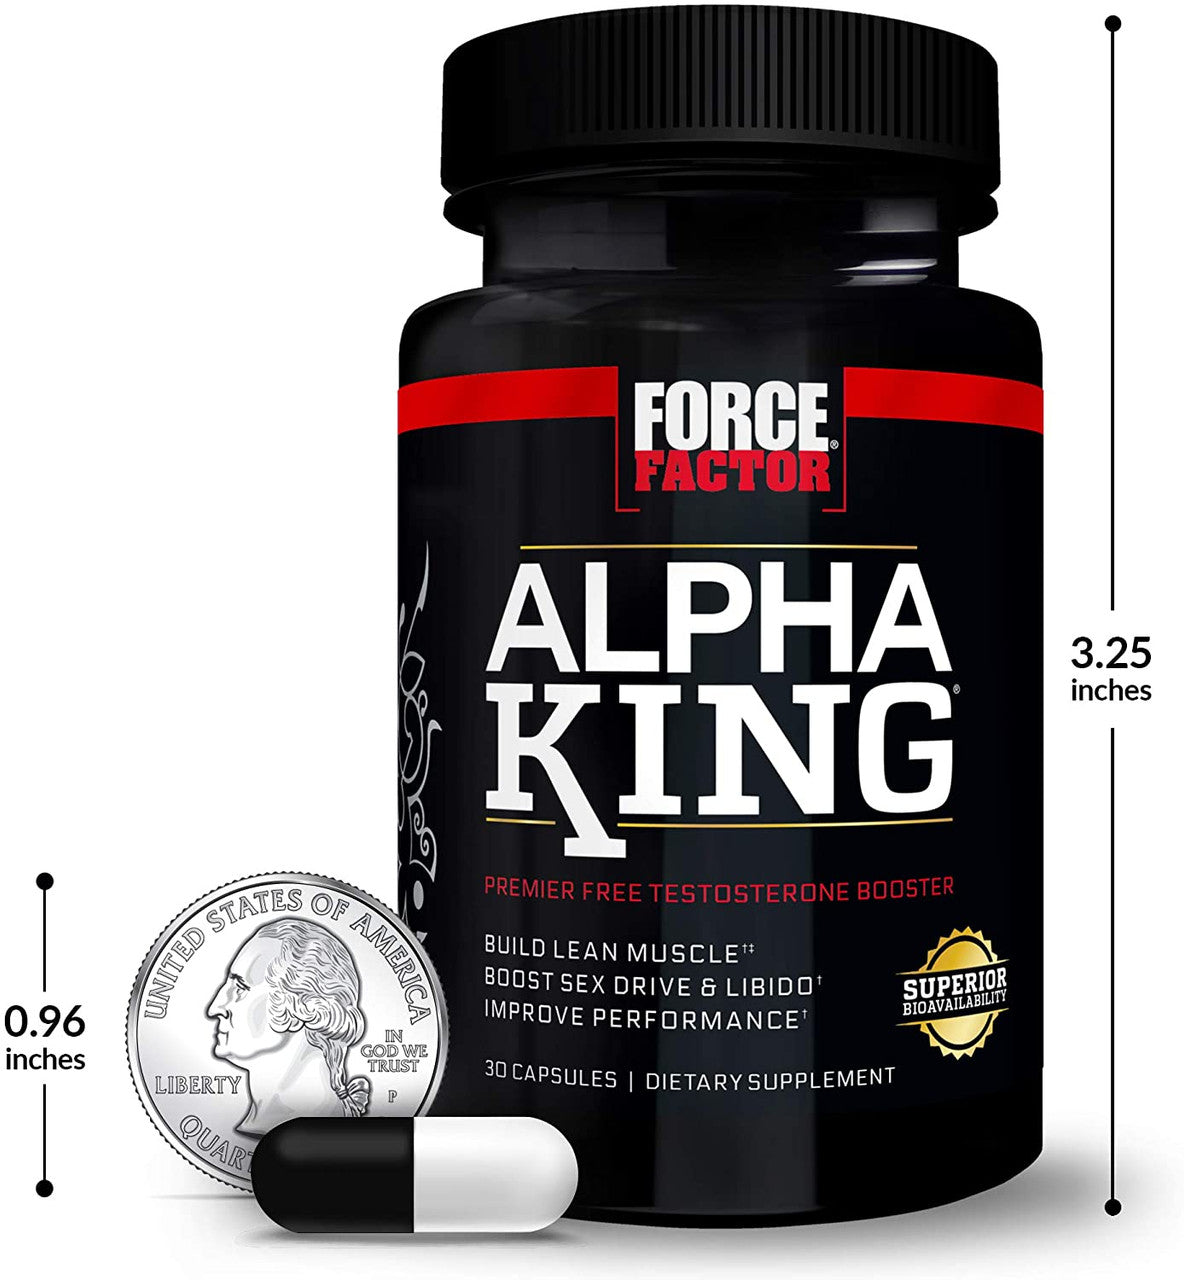 Force Factor Alpha King actual size